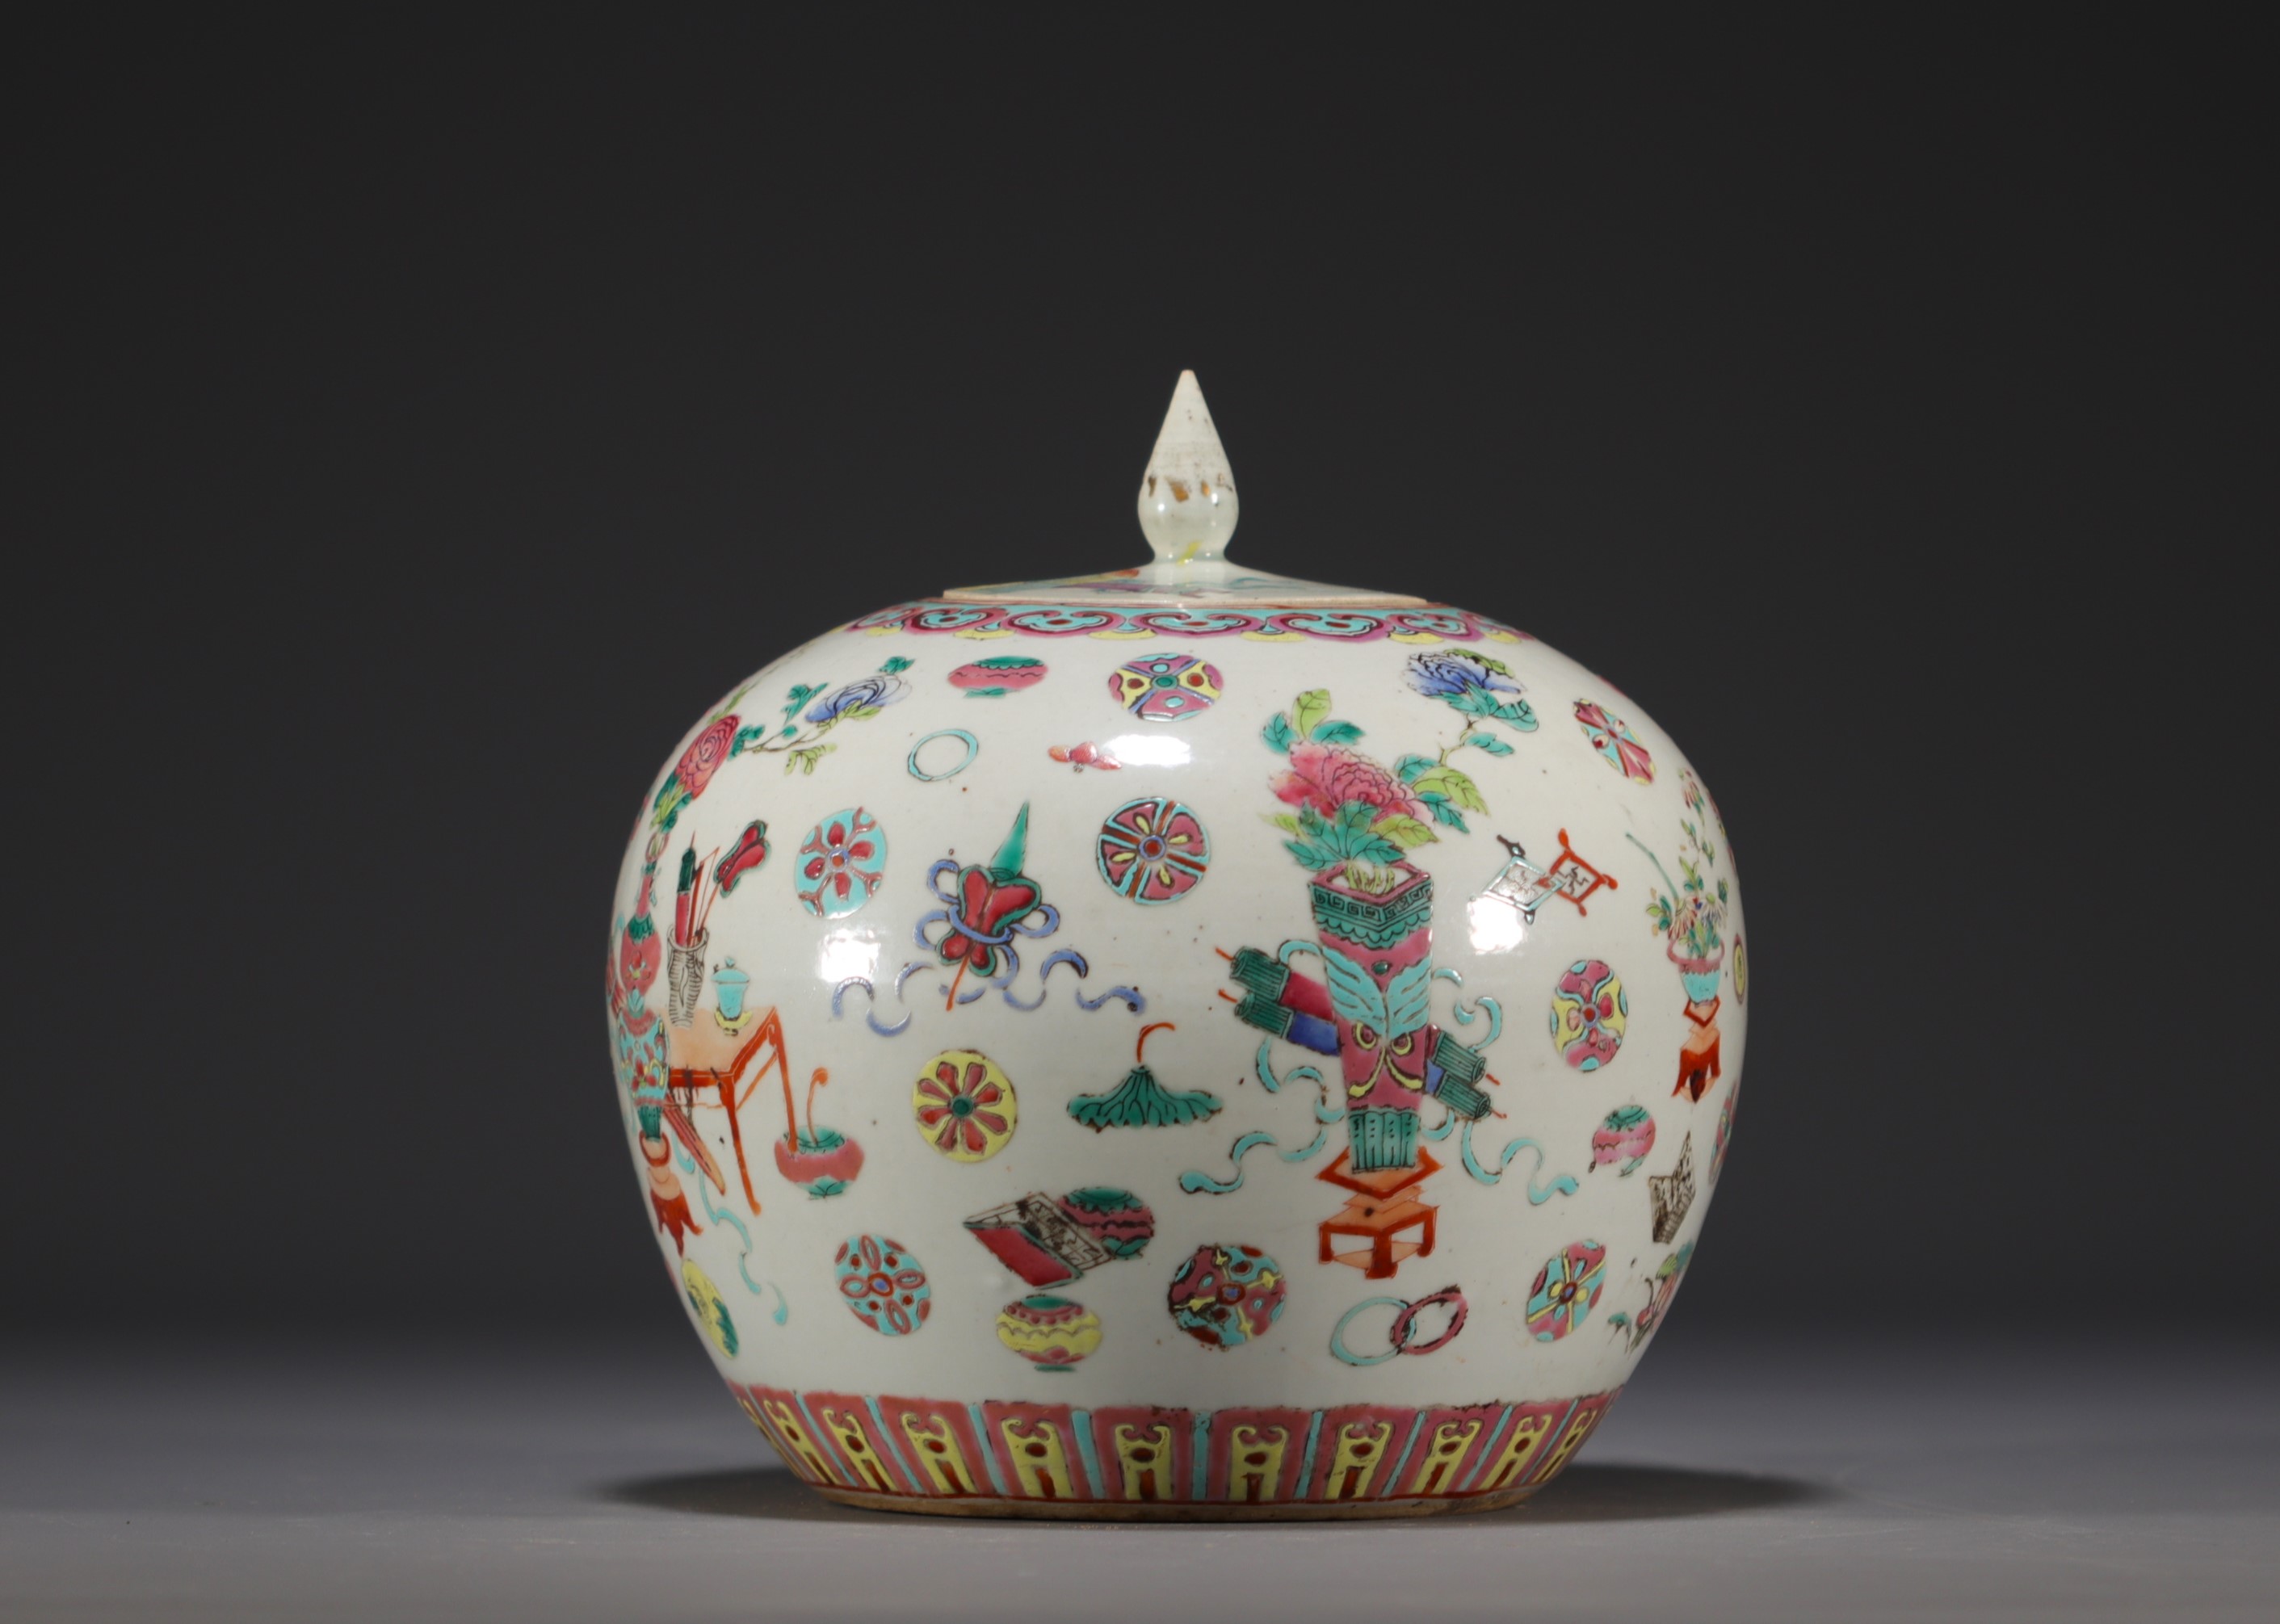 China - A famille rose porcelain ginger pot, 19th century. - Image 2 of 4